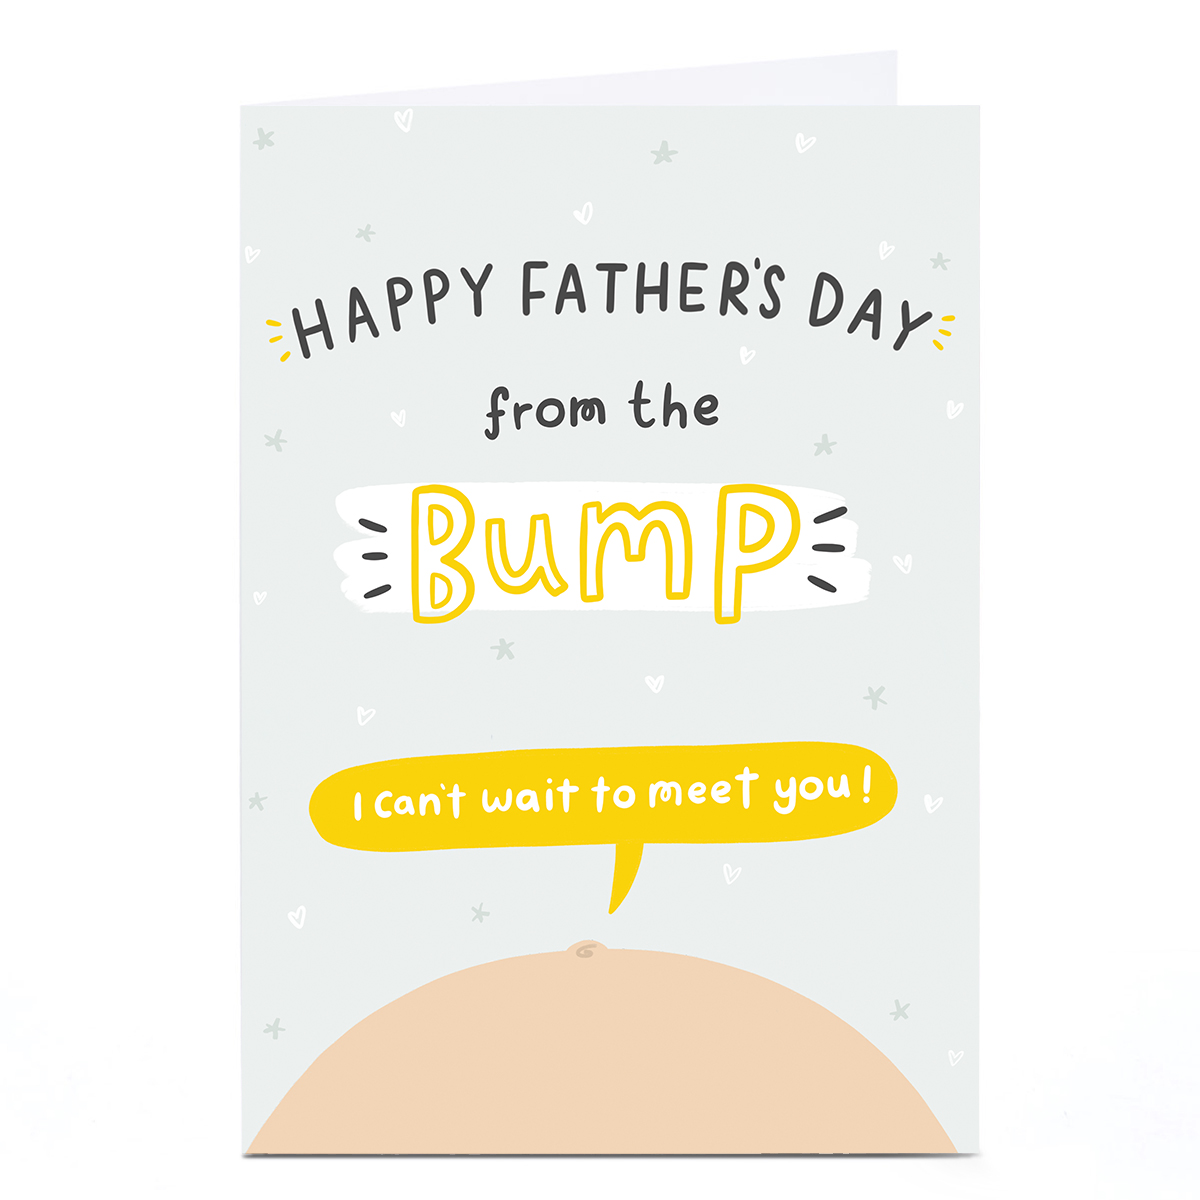 Personalised Jess Moorhouse Fathers Day Card - From the Bump